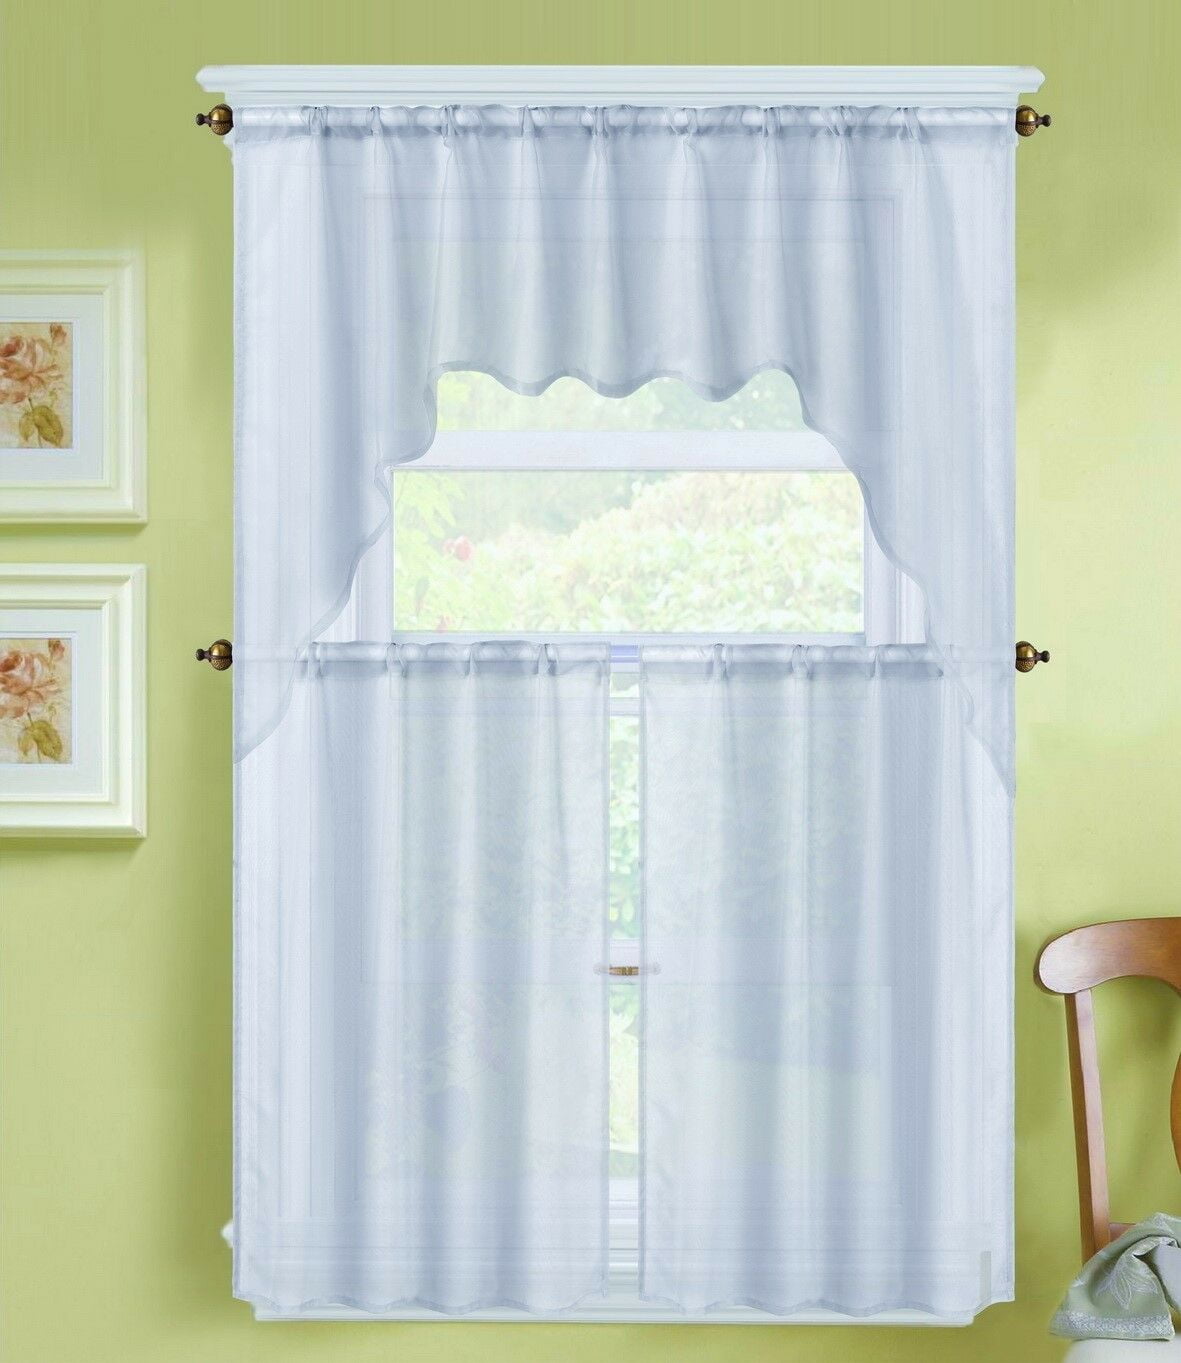 3PC VOILE SHEER KITCHEN WINDOW CURTAIN TREATMENT 2 TIERS AND 1 SWAG VALANCE K66 